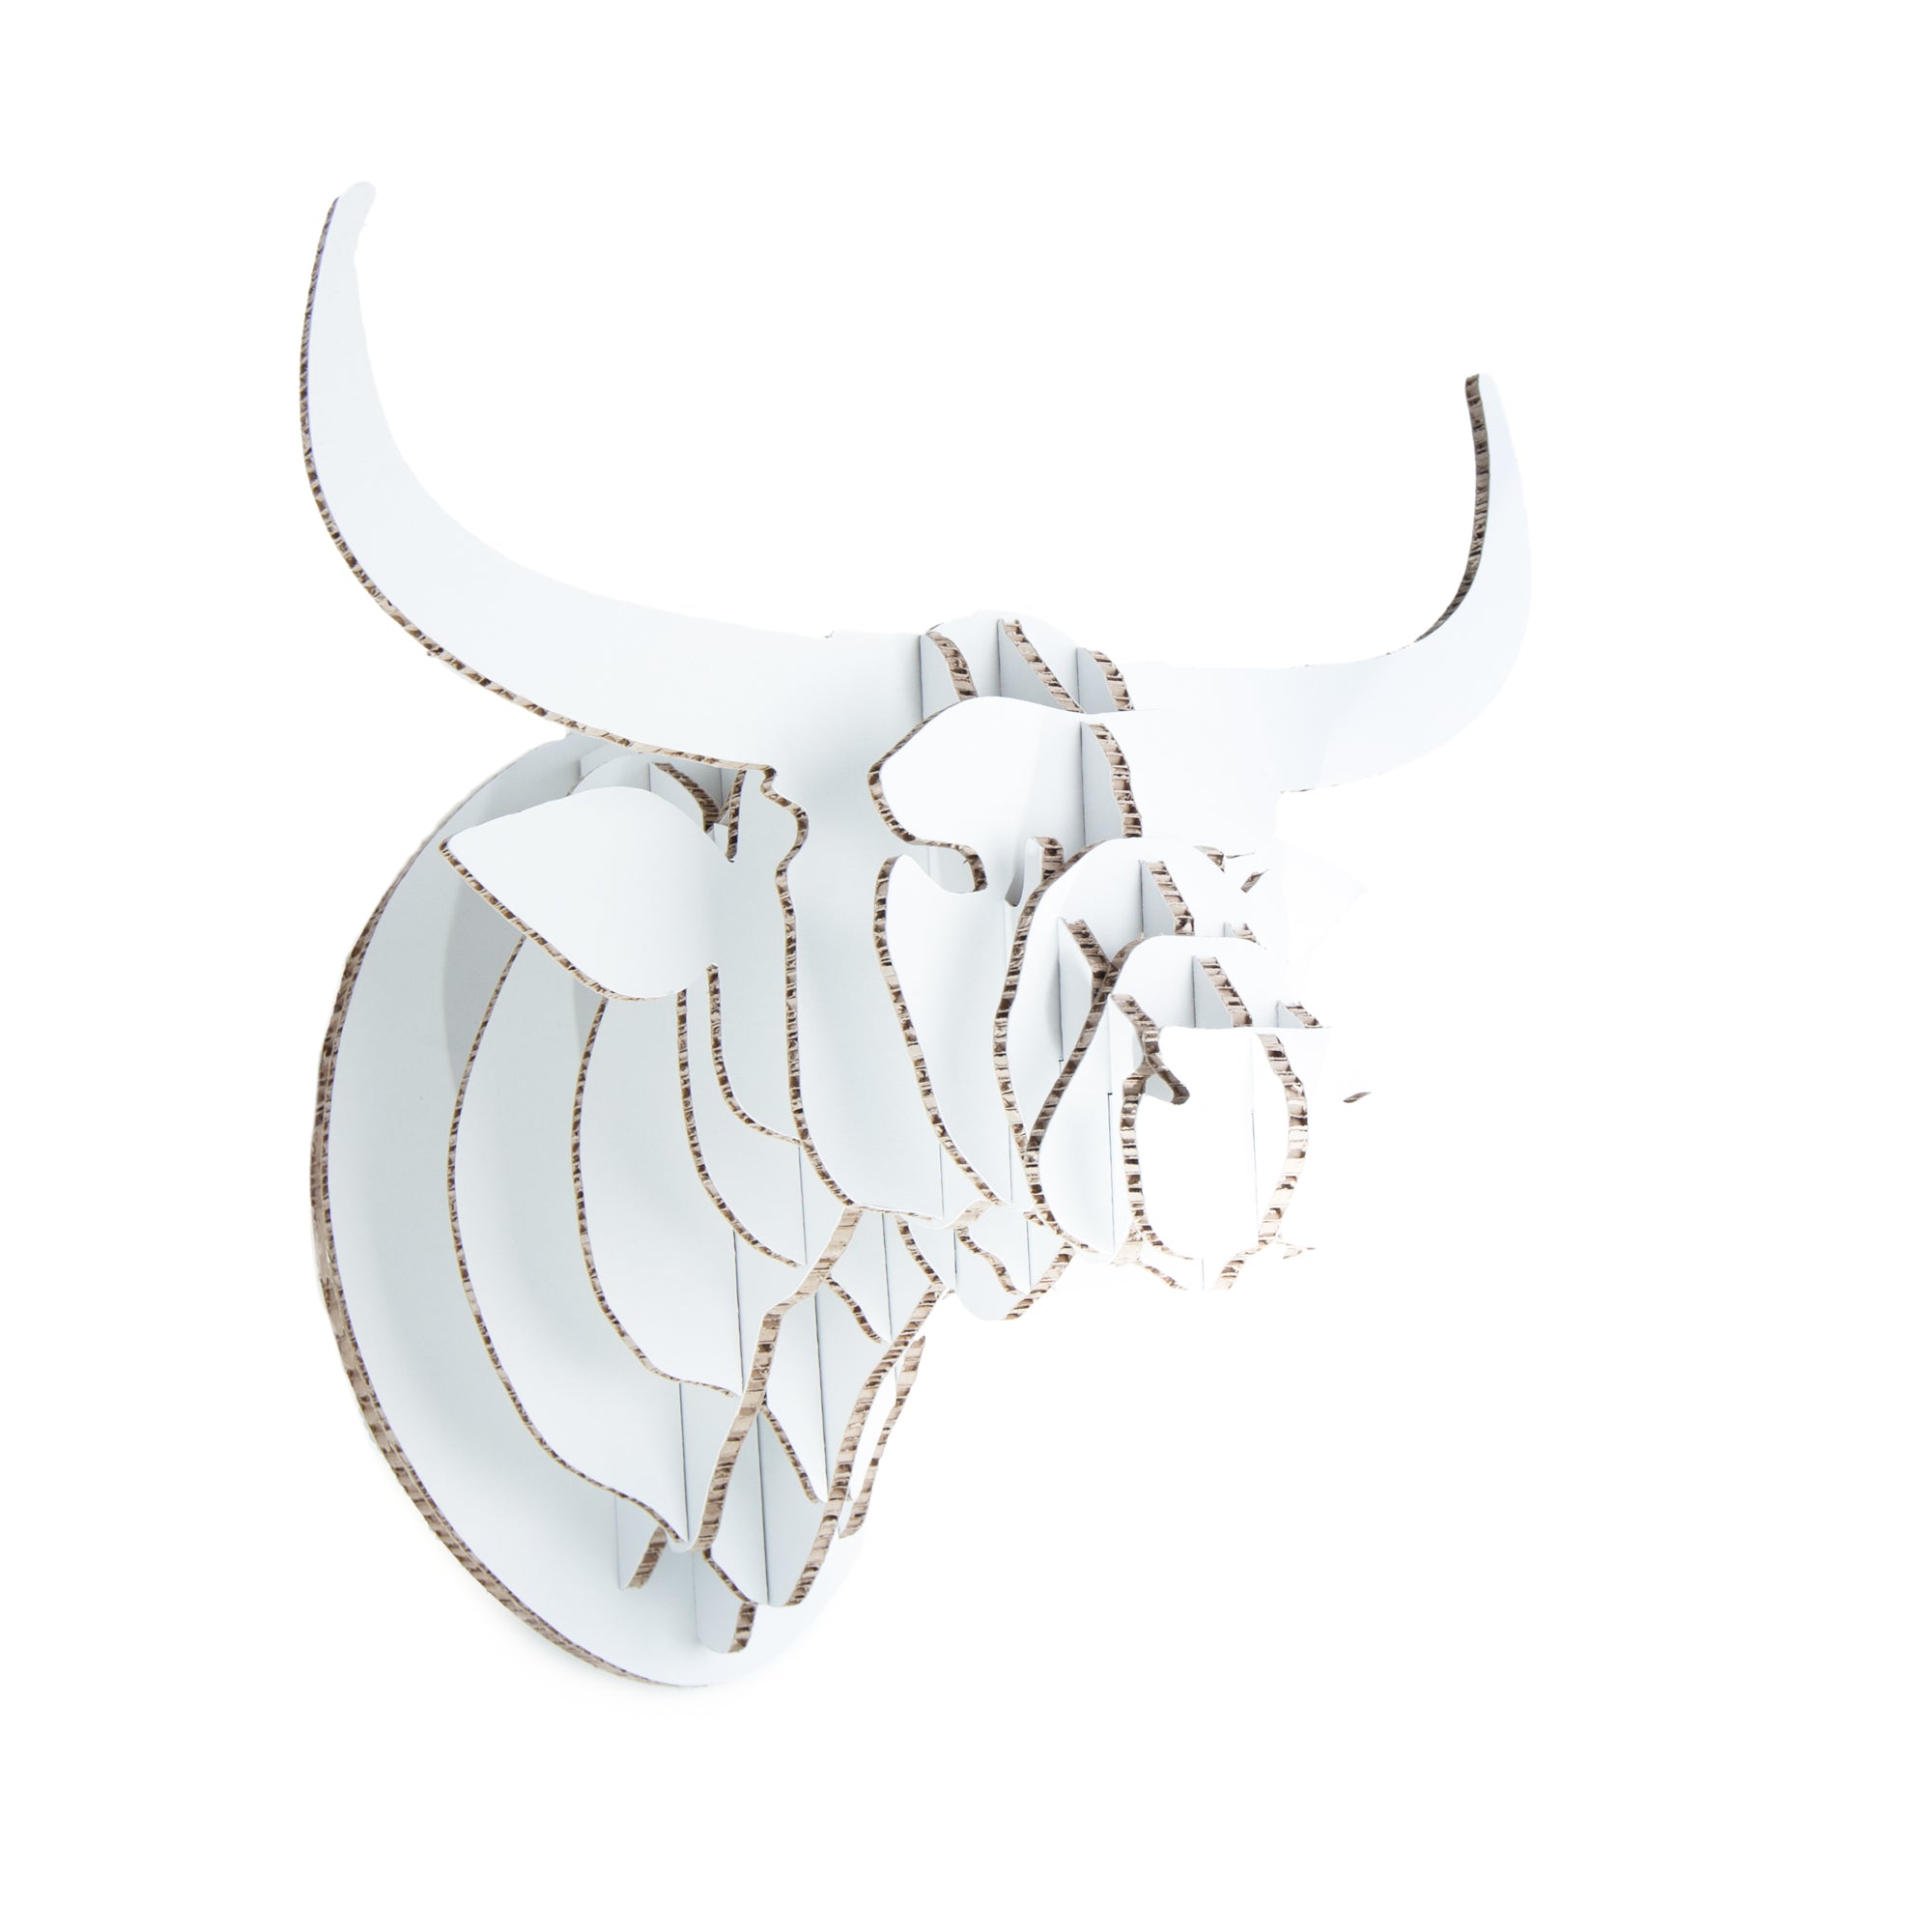 Nguni Trophy Head in X-Board, Head On Design, recycled paperboard